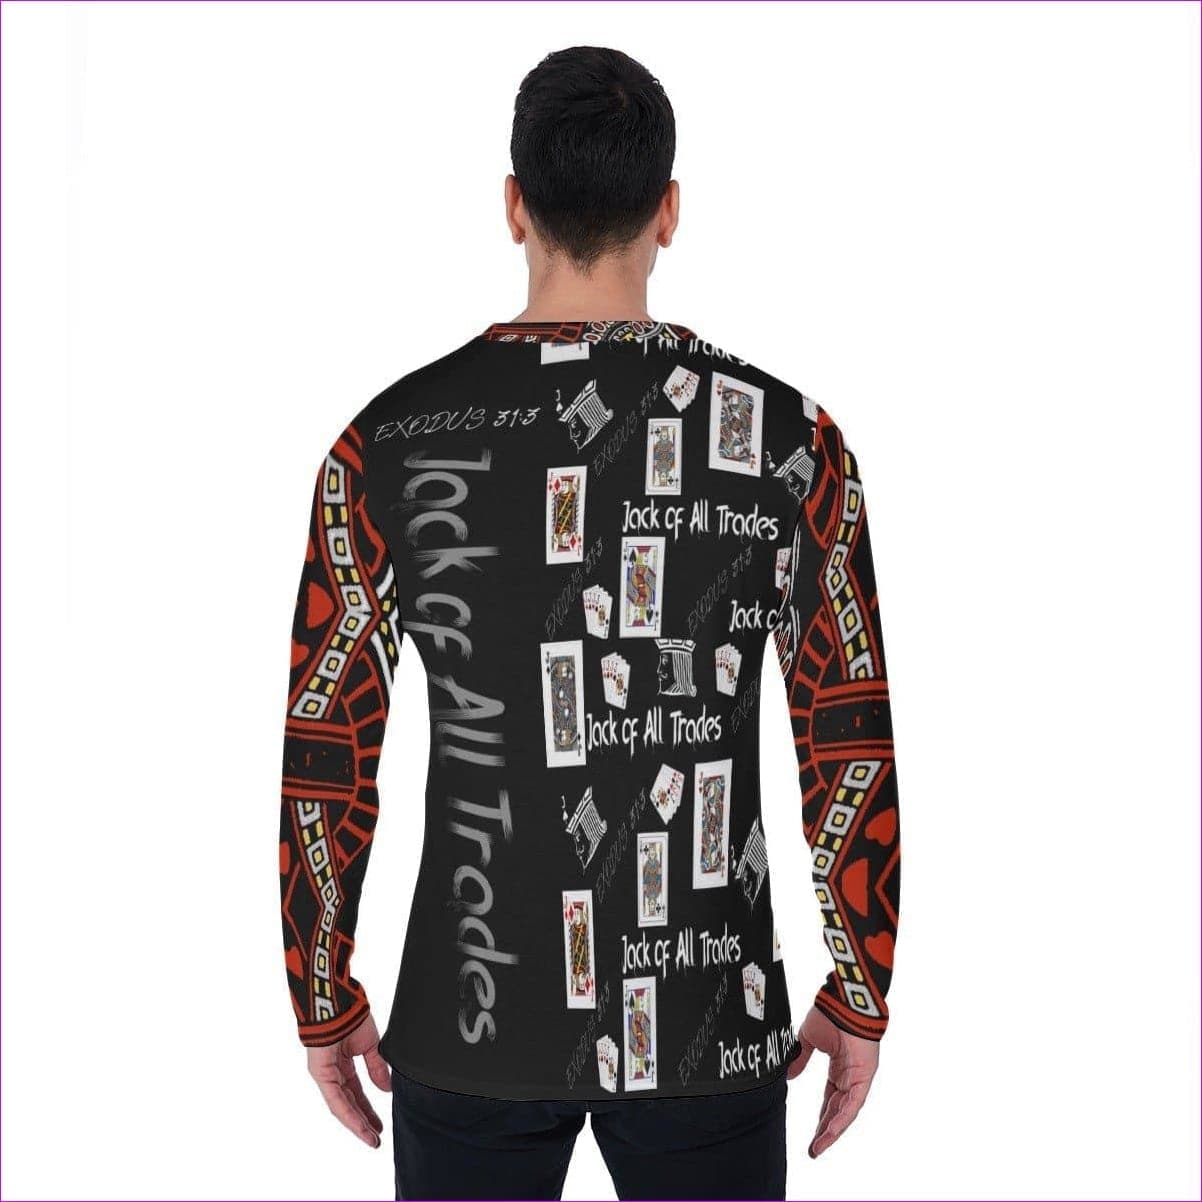 - Jack of All Trades Exodus 31:3 Men's Long Sleeve Tee - mens t-shirt at TFC&H Co.